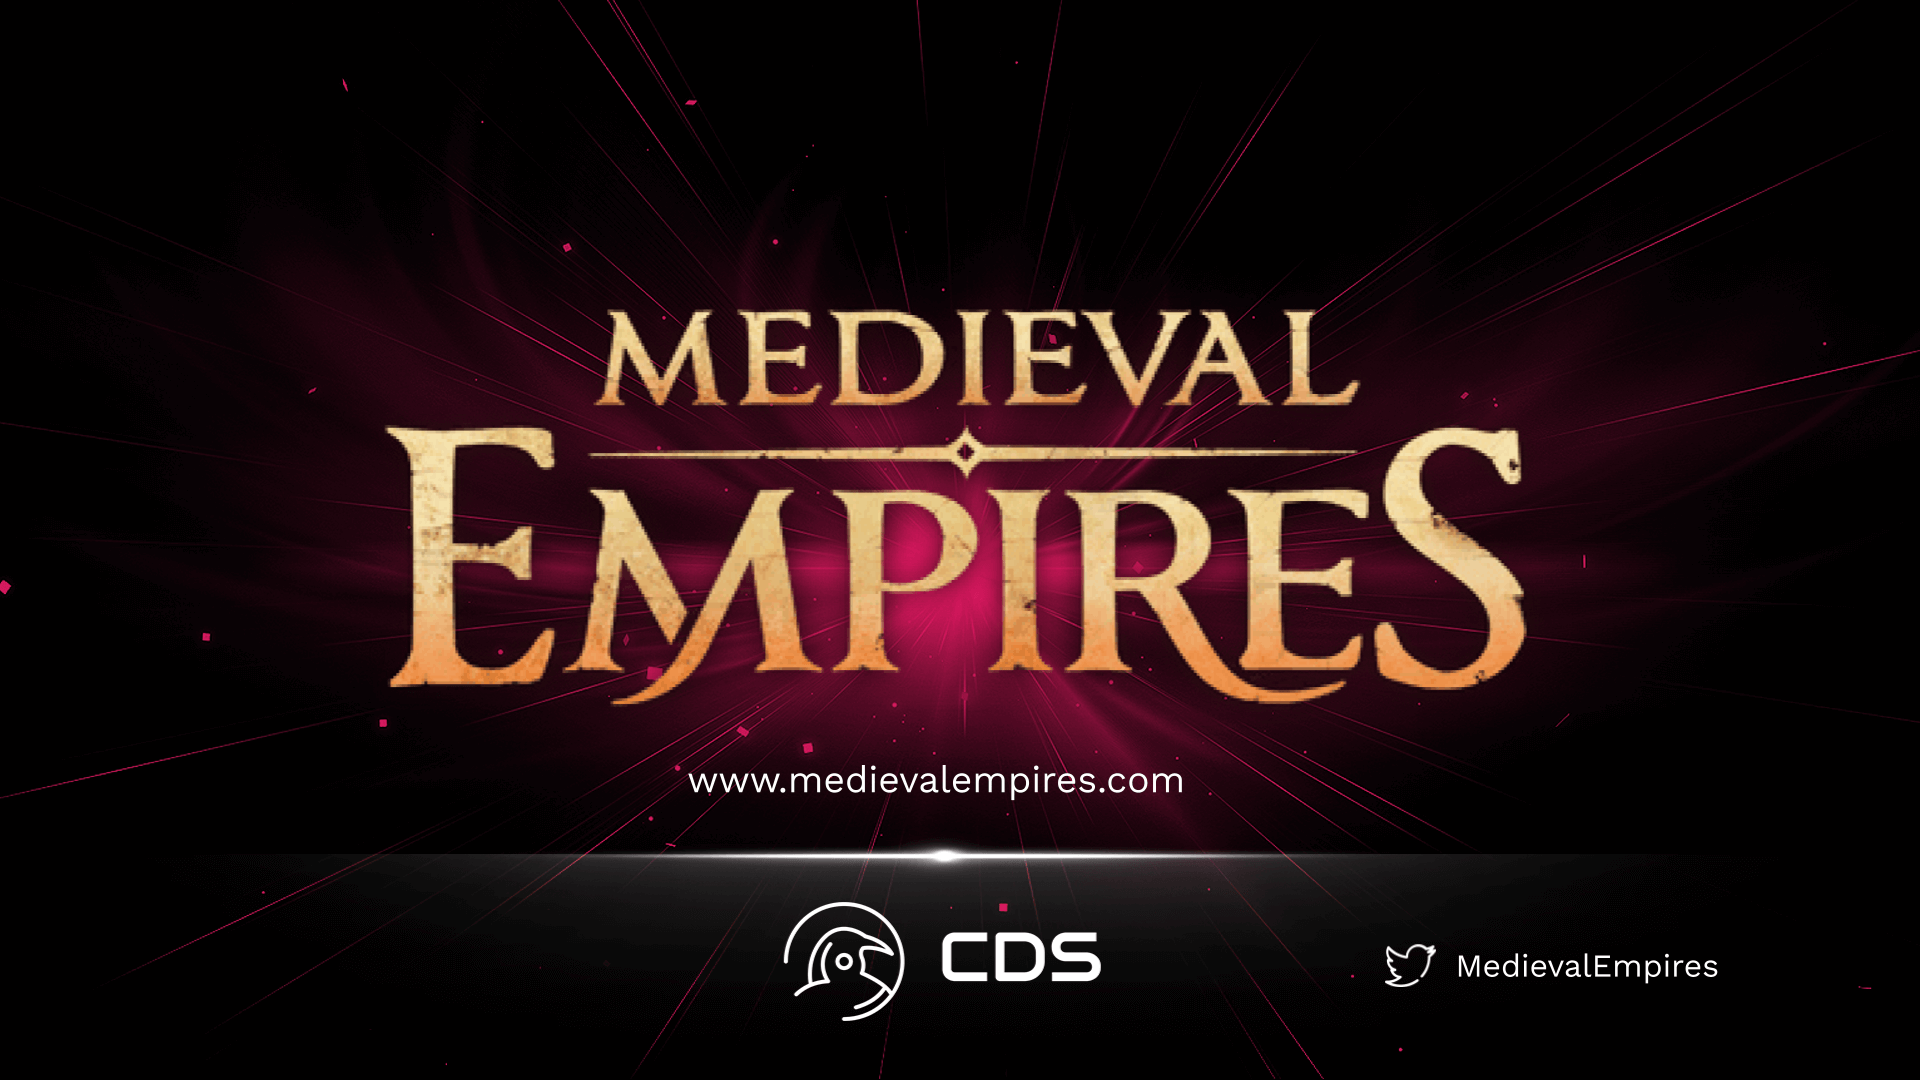 What is Medieval Empires